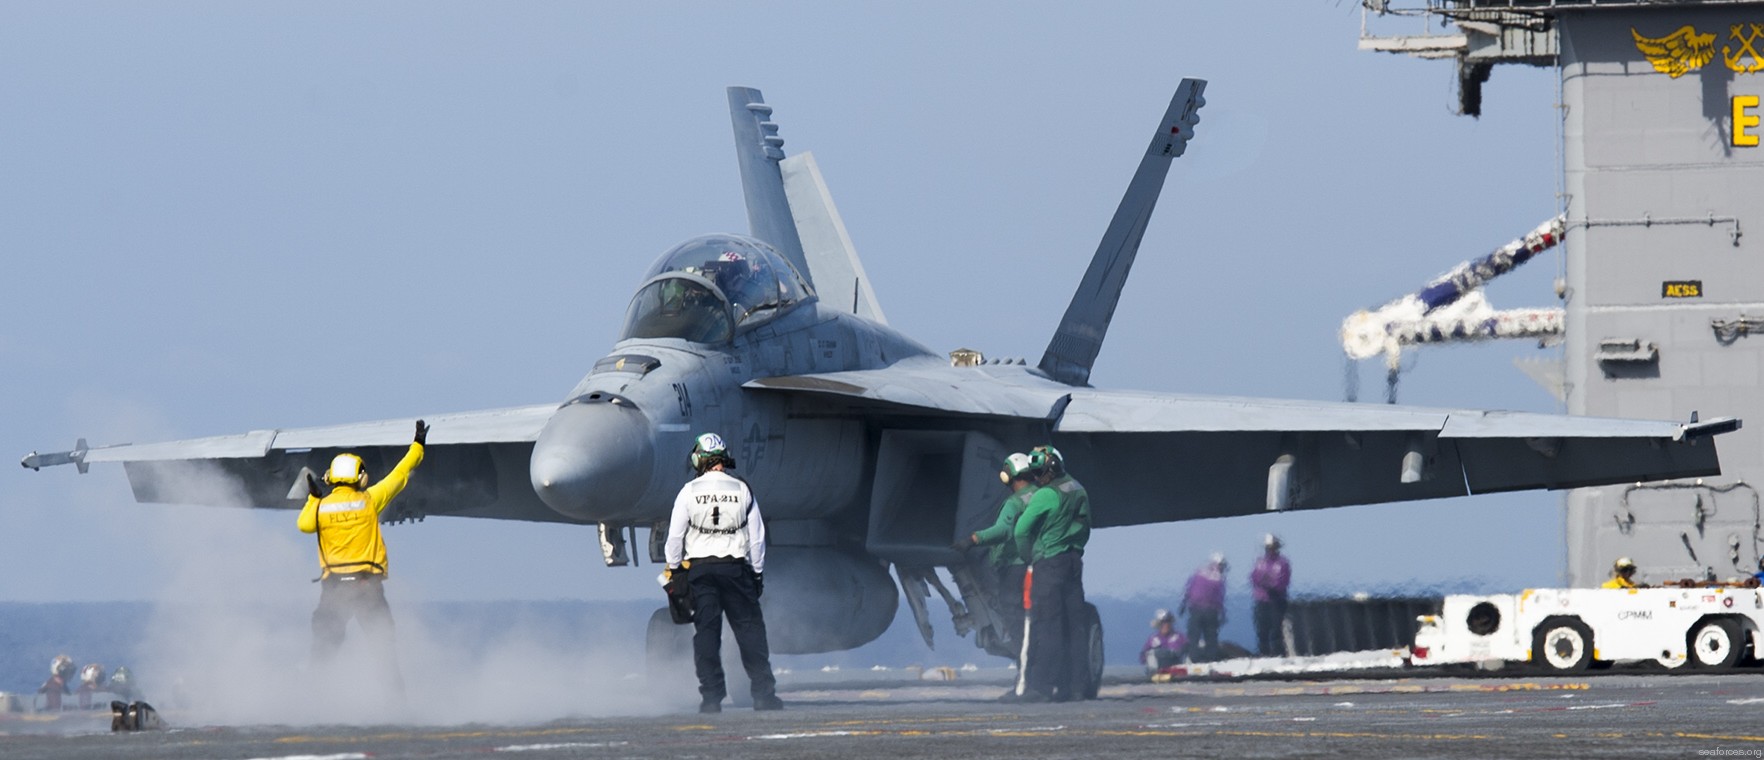 vfa-211 fighting checkmates strike fighter squadron f/a-18f super hornet navy carrier air wing cvw-1 uss harry s. truman cvn-75 40